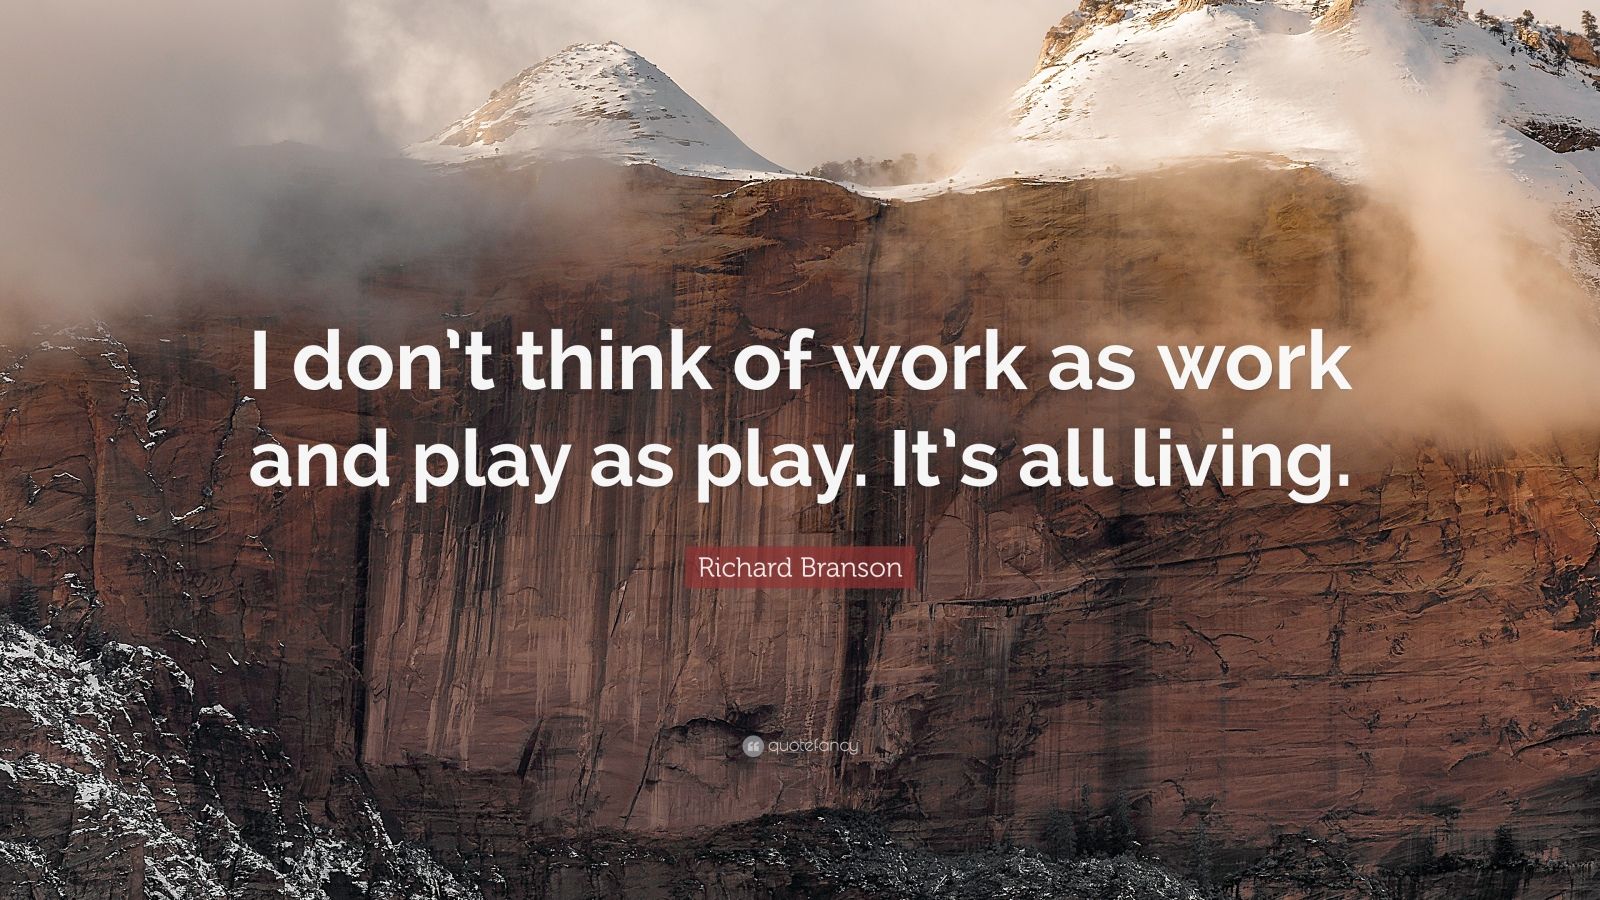 Richard Branson Quote: “I don’t think of work as work and play as play ...